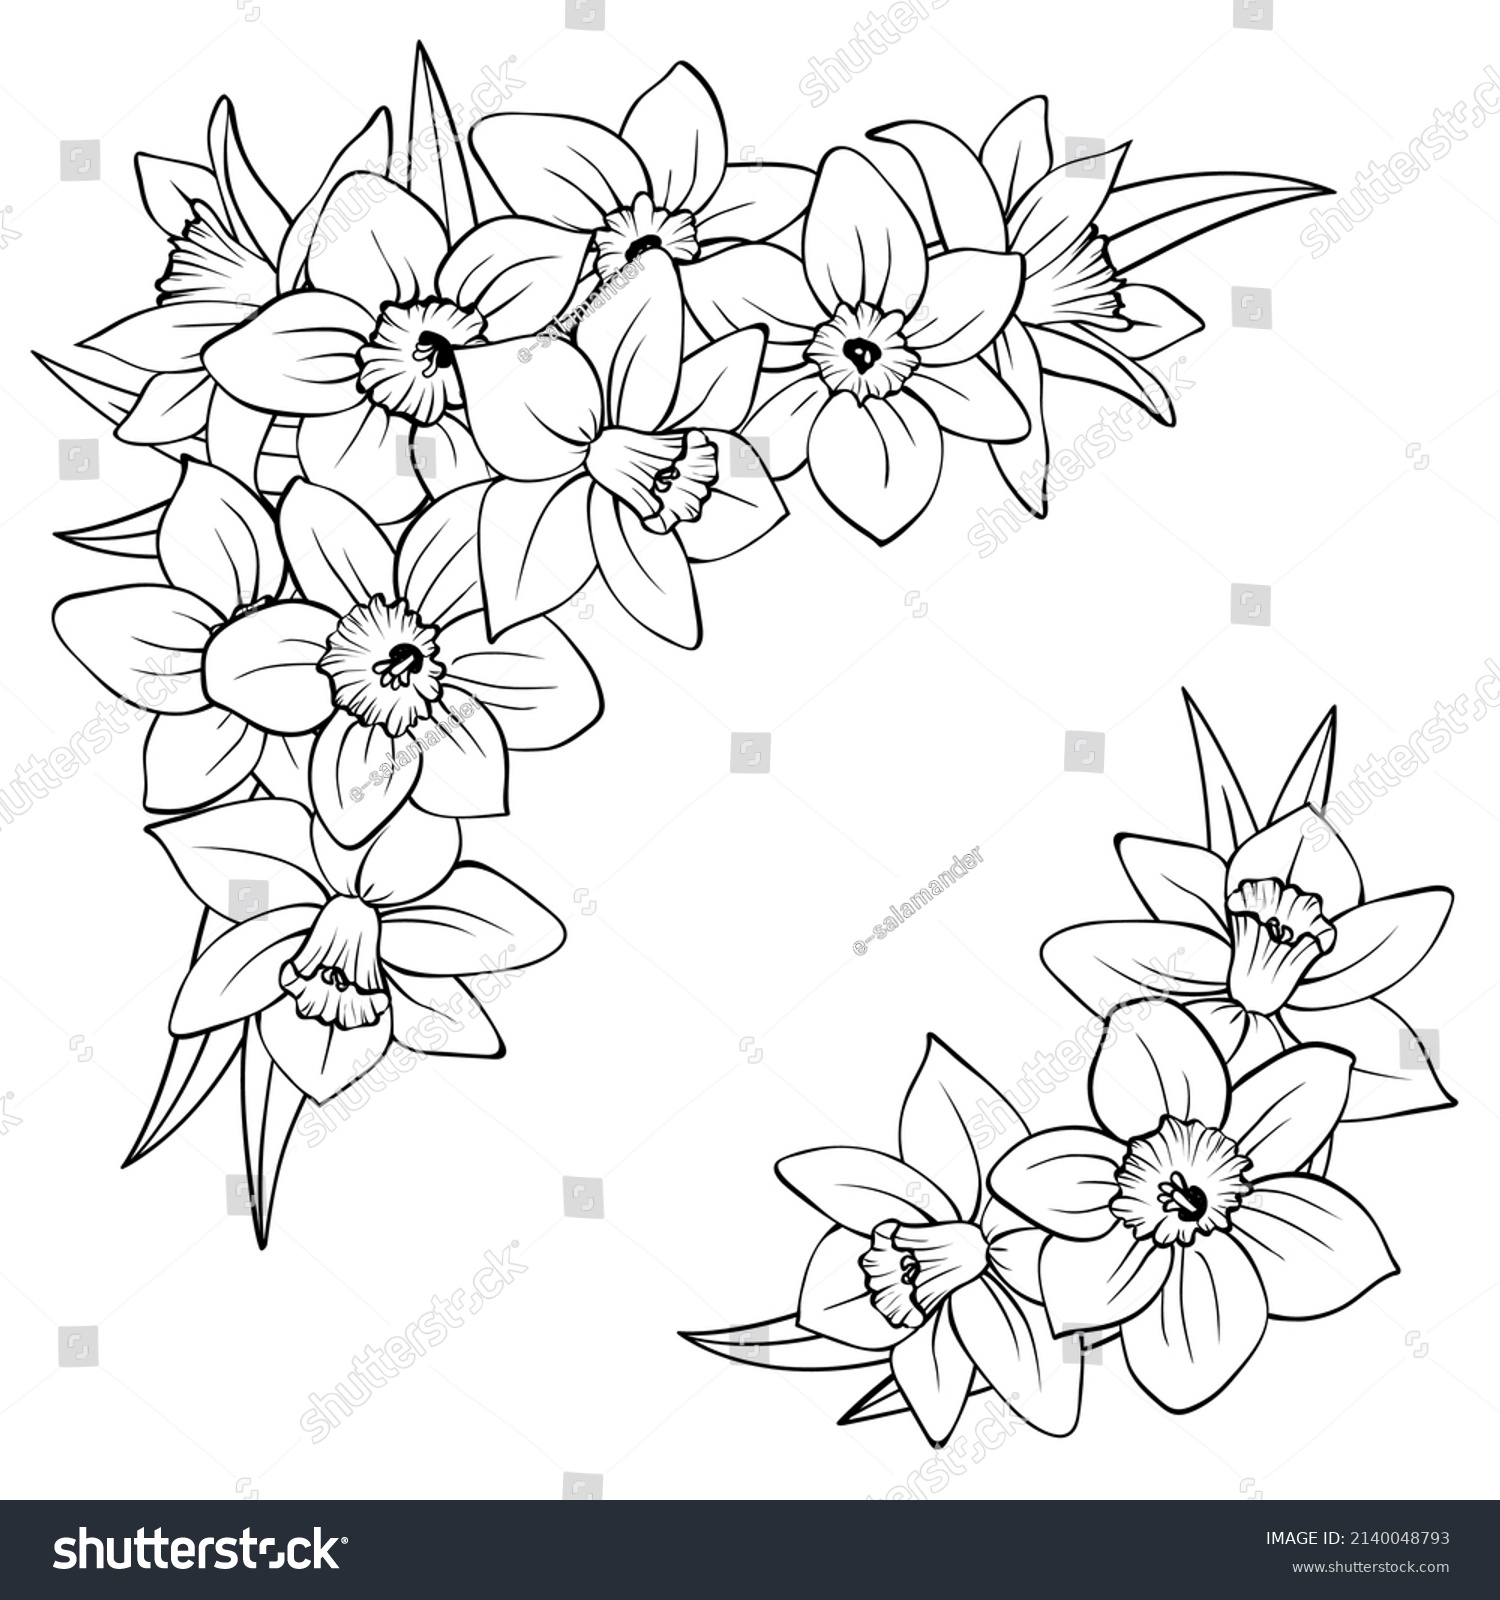 SVG of Corner composition of narcissus flowers isolated on white. Daffodils outline hand drawn sketch, few buds and leaves. Vector decorative element for floral design, wedding or greeting card. svg